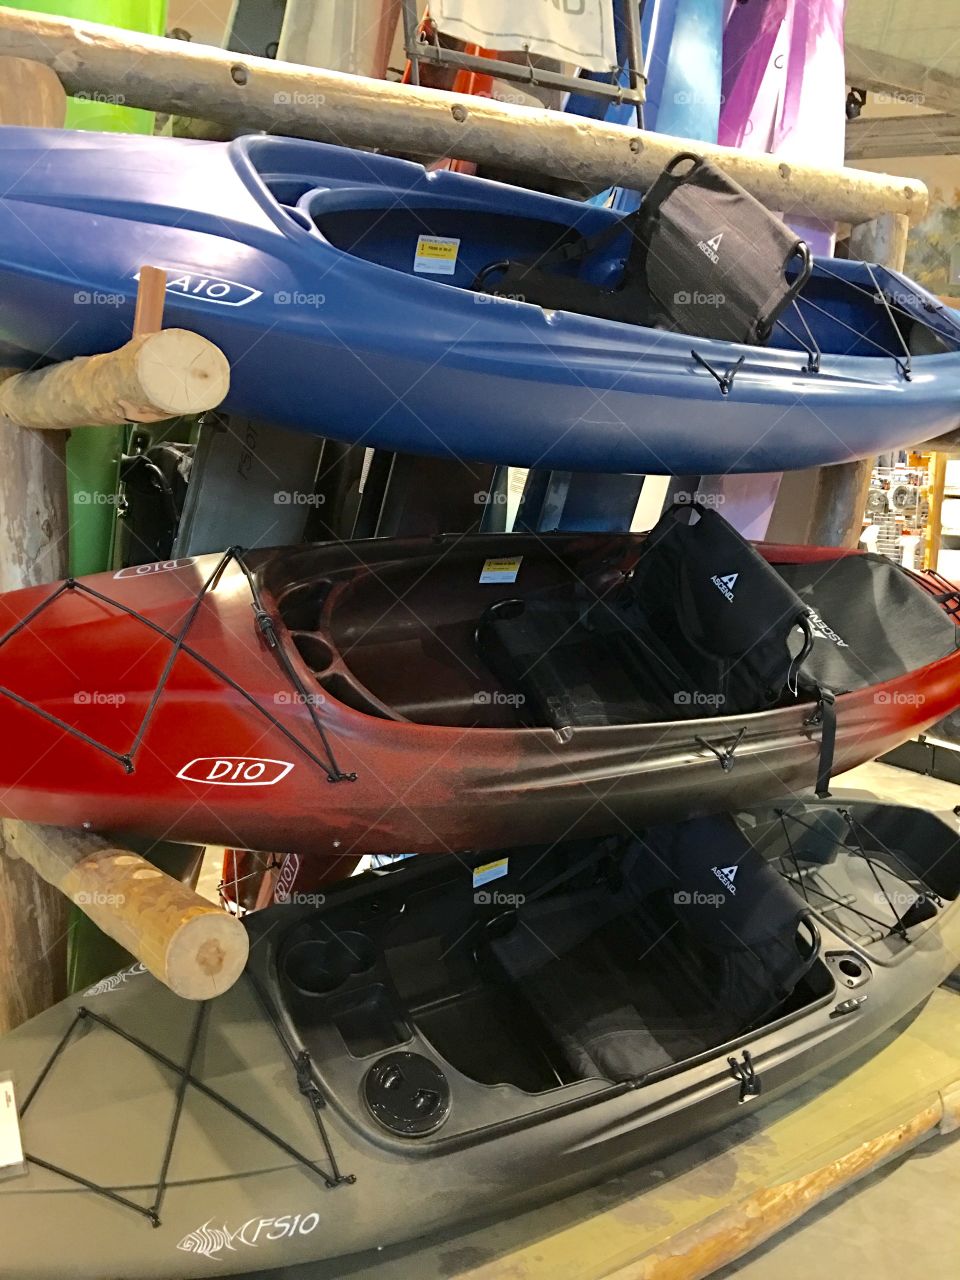 Kayaks in Store For Sale, Three of Them